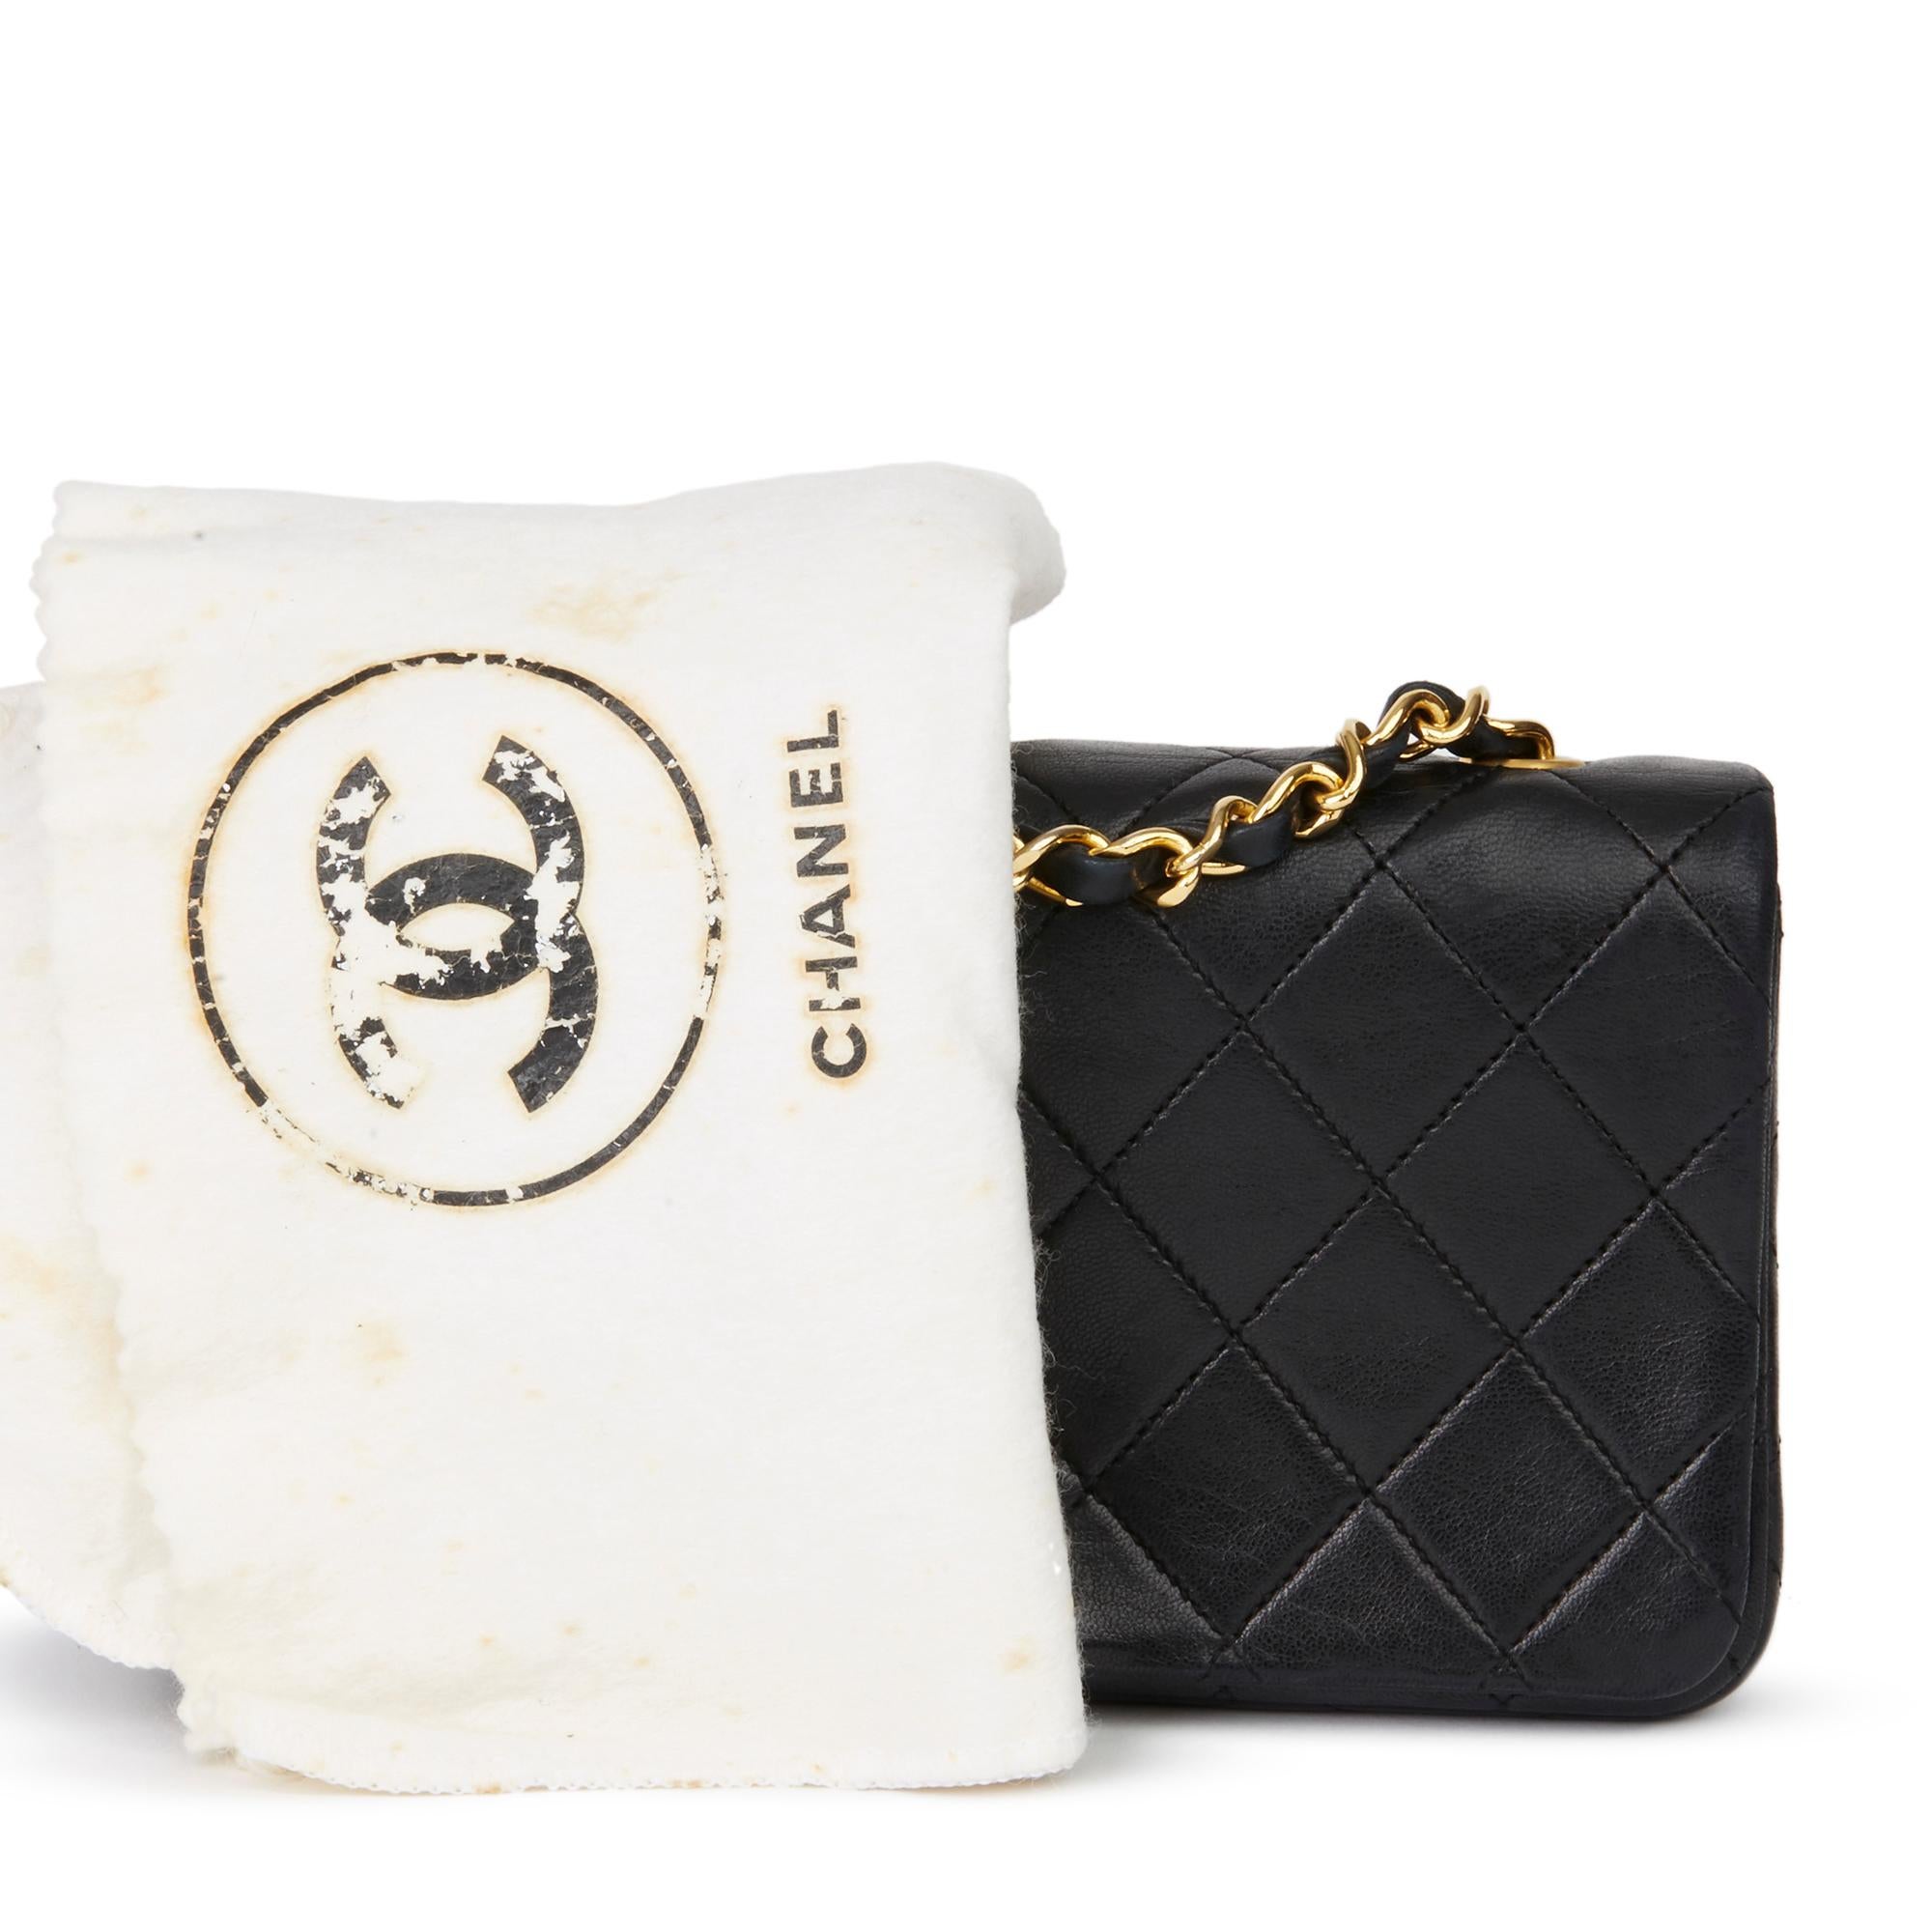 1991 Chanel Black Quilted Lambskin Vintage Mini Flap Bag  7